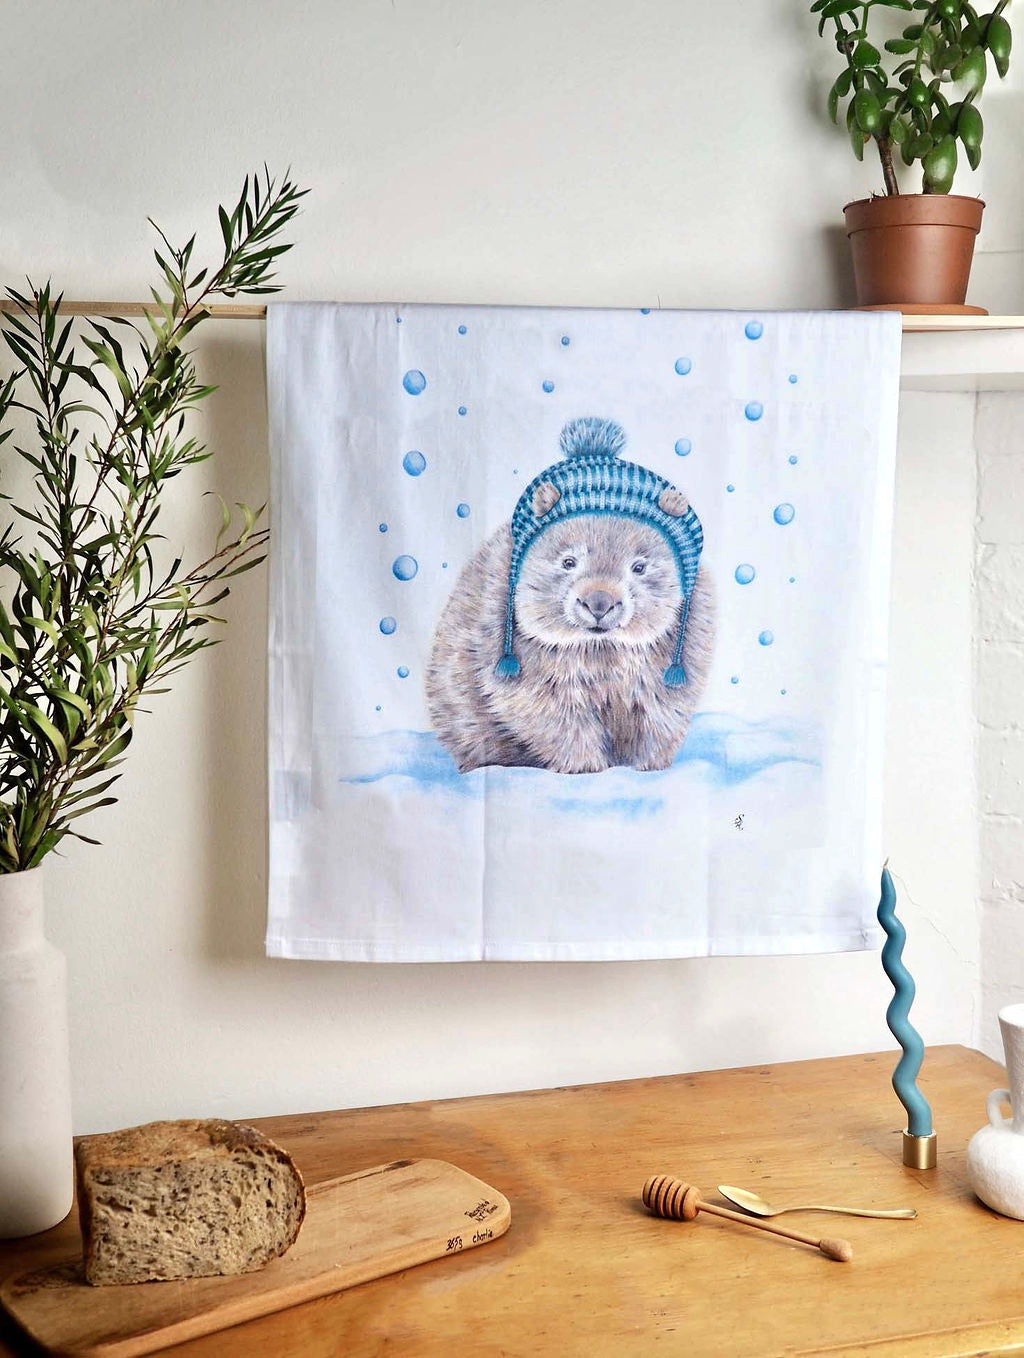 Image shows a tea towel illustrated with a wombat wearing a blue tasseled beanie, standing in blue tinged snow while the snow falls. The tea towel is hanging on a wall using a pale wooden hanging rail above a wooden kitchen bench and against a white kitchen backdrop.